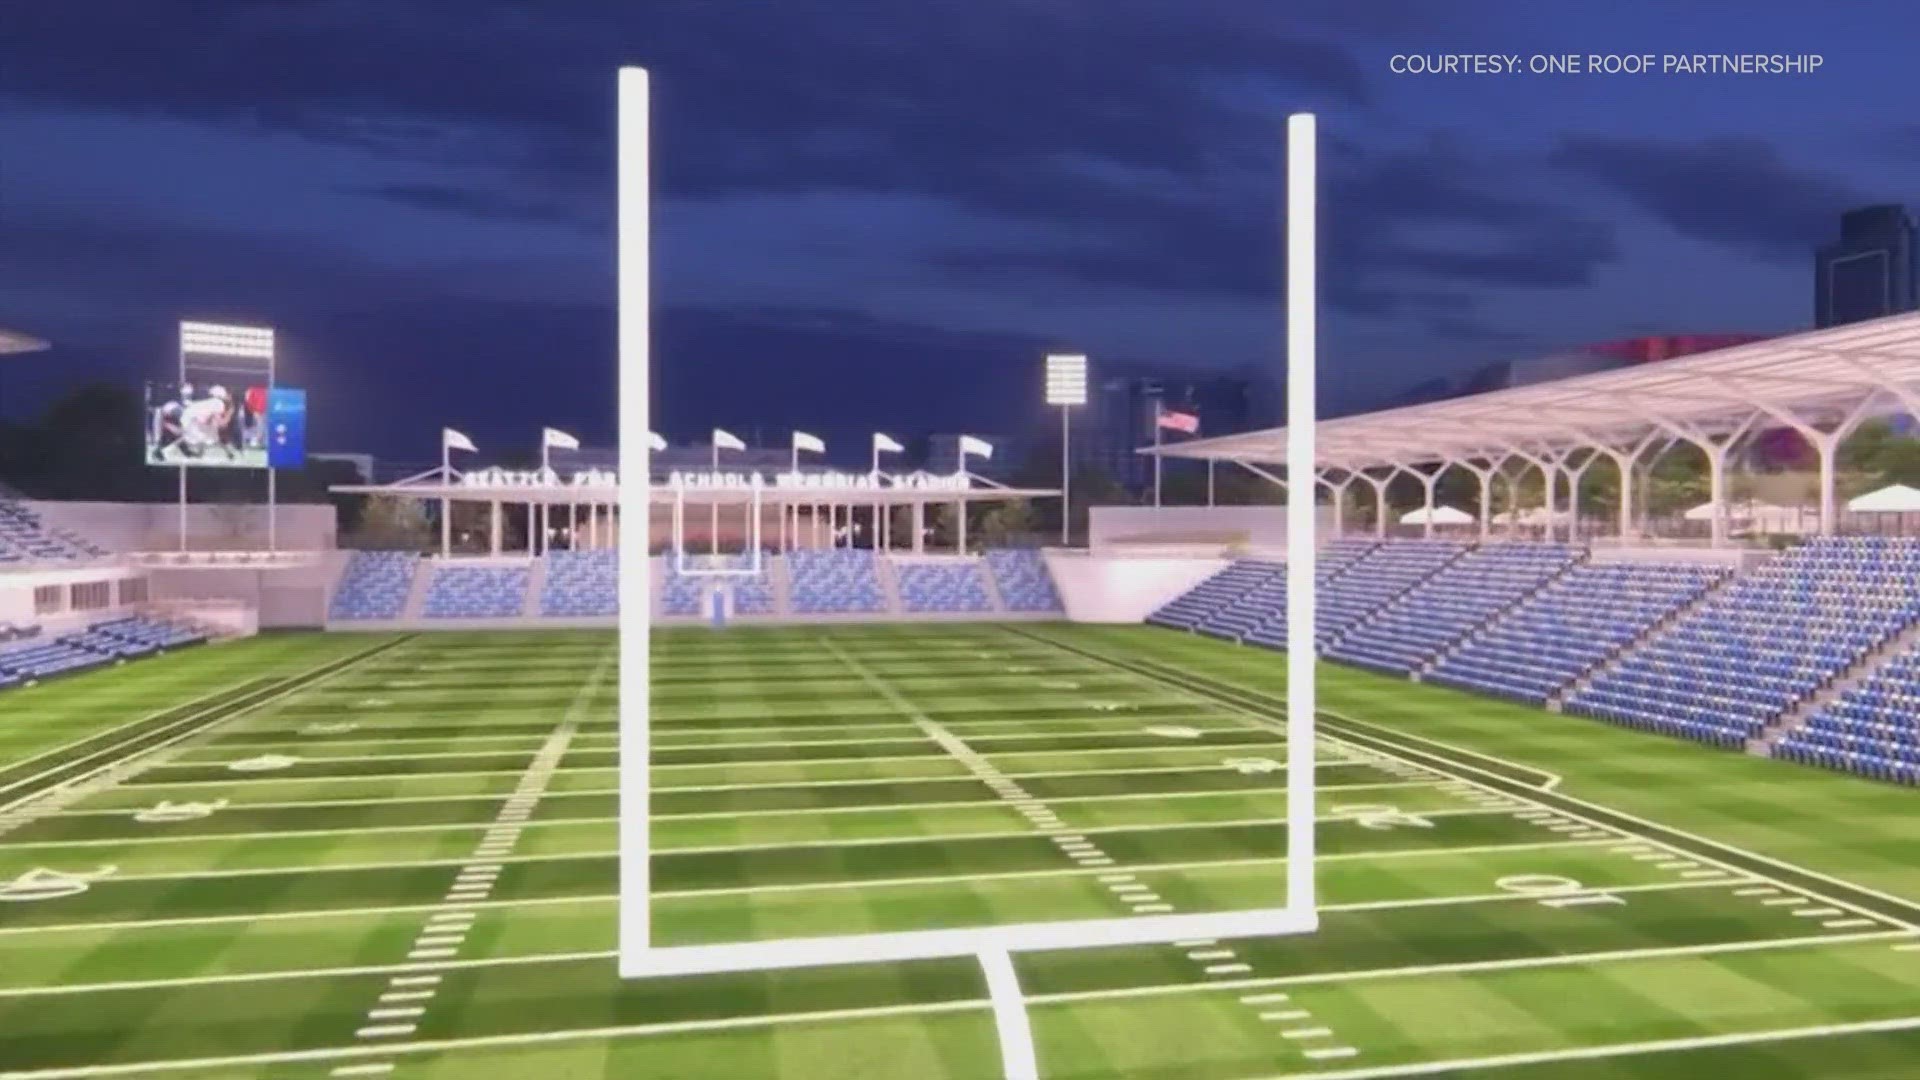 The One Roof Partnership was one of two proposals to revamp Memorial Stadium.